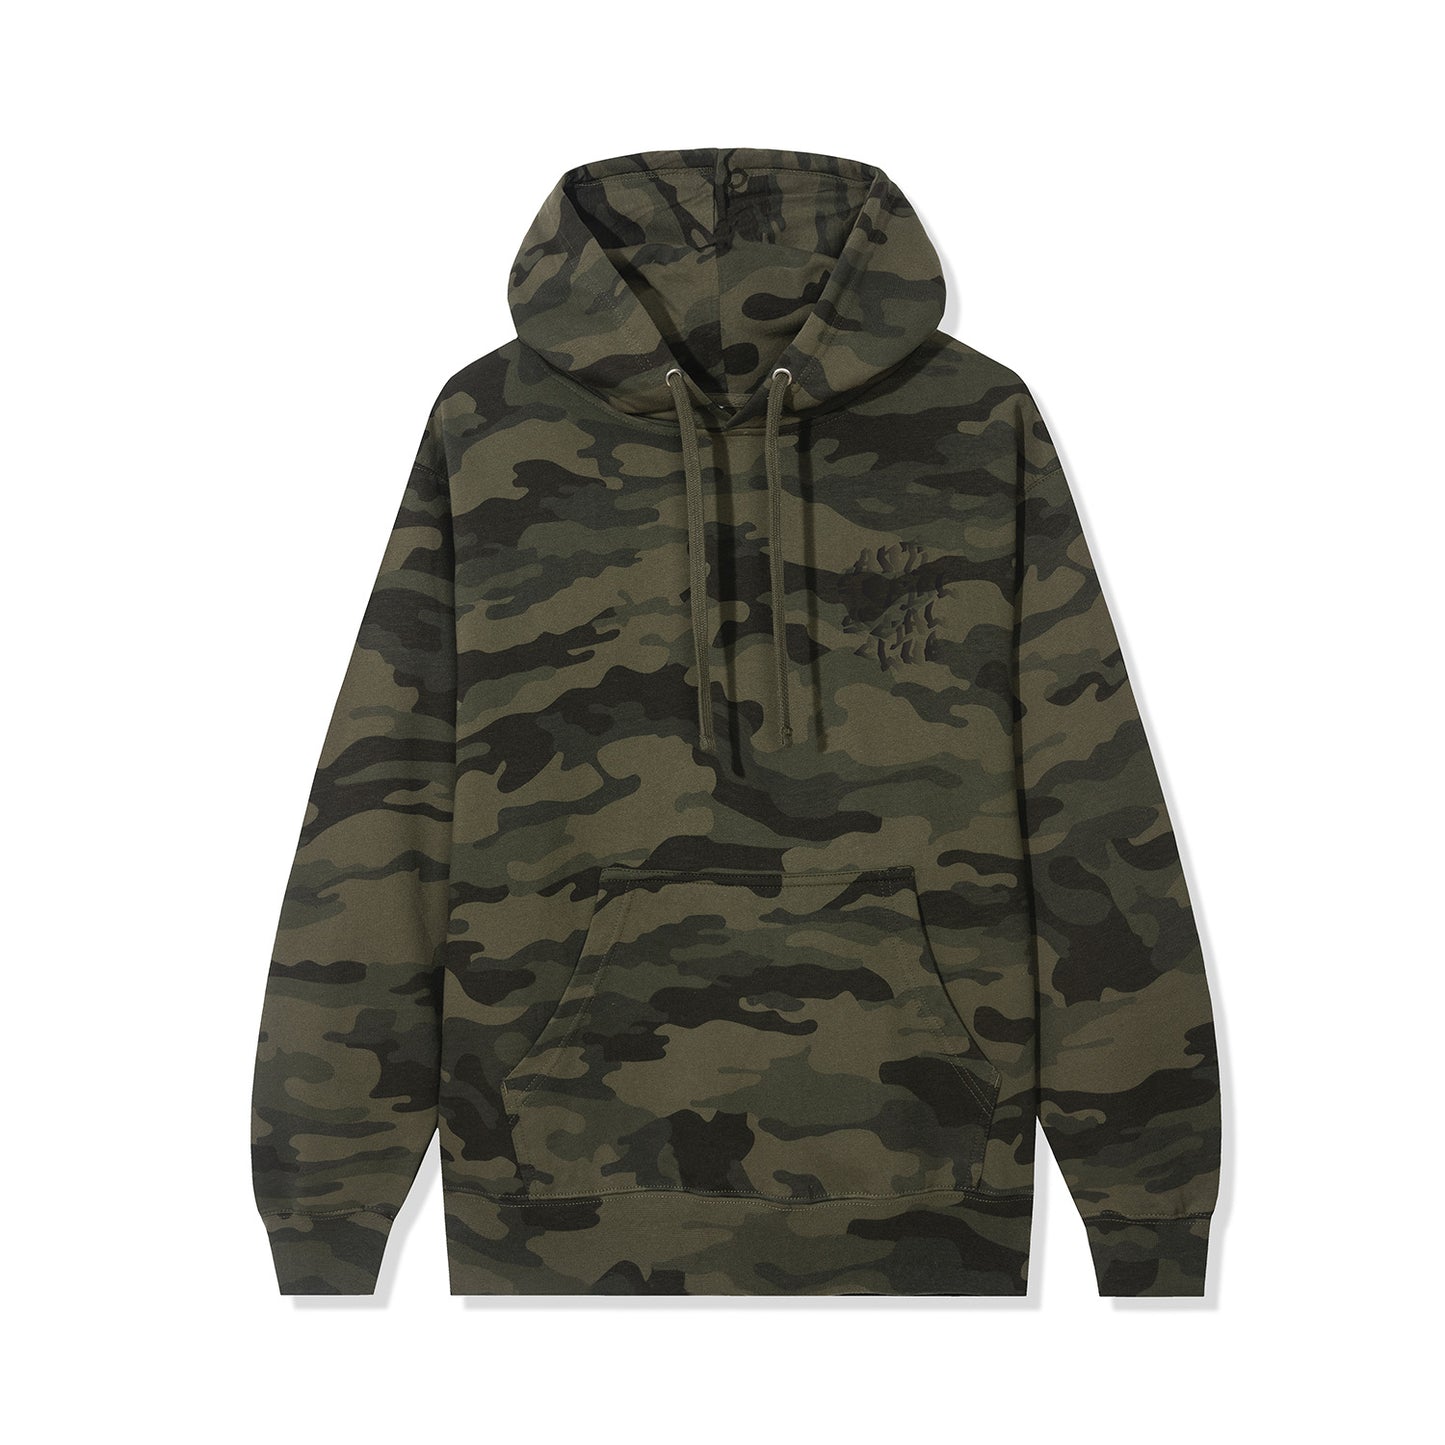 assc-cry-out-loud-hoodie-forest-camo-front